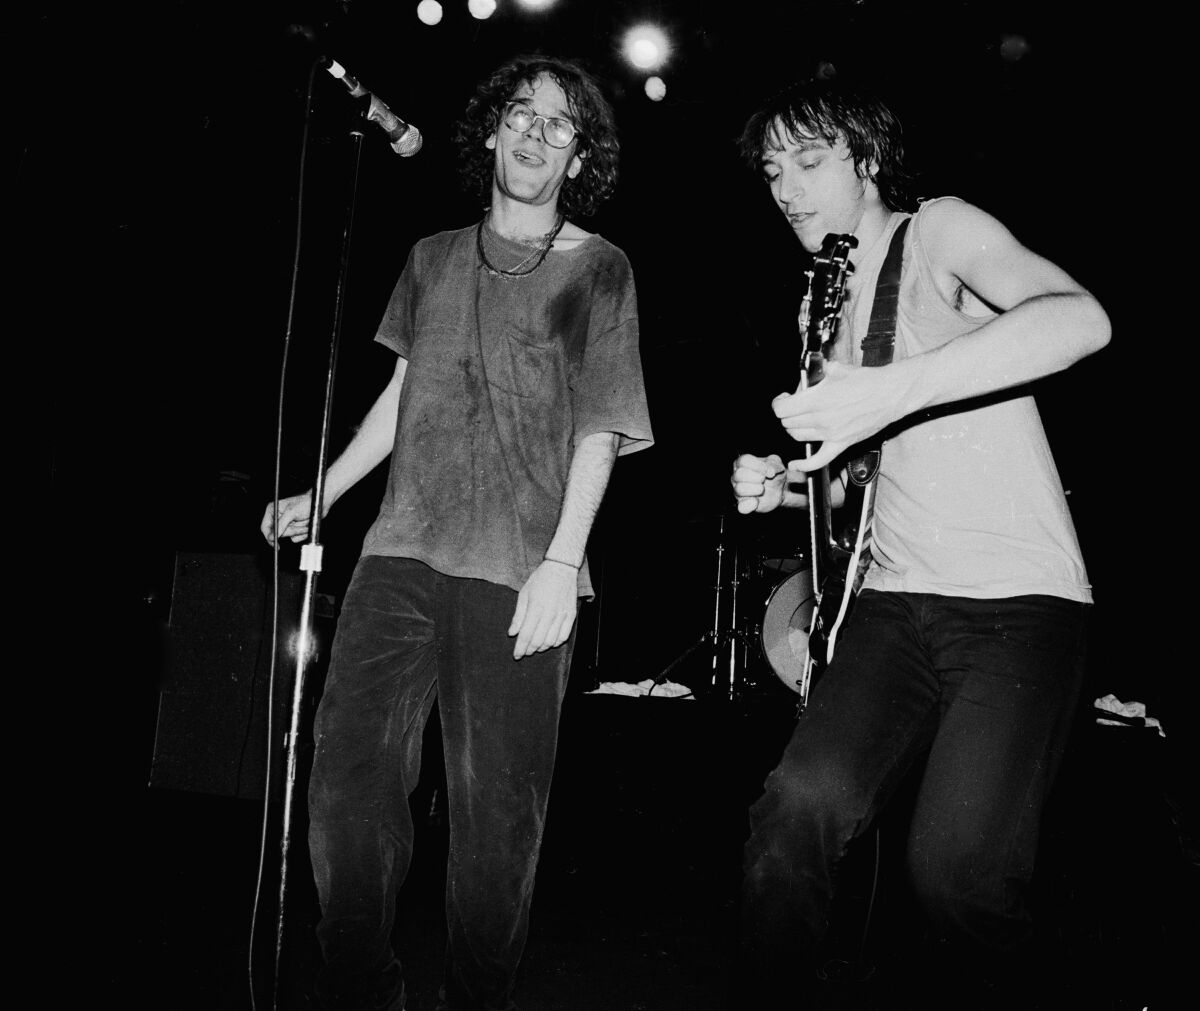 A black-and-white photo of two sweaty men, the one on the right holding a guitar, on stage